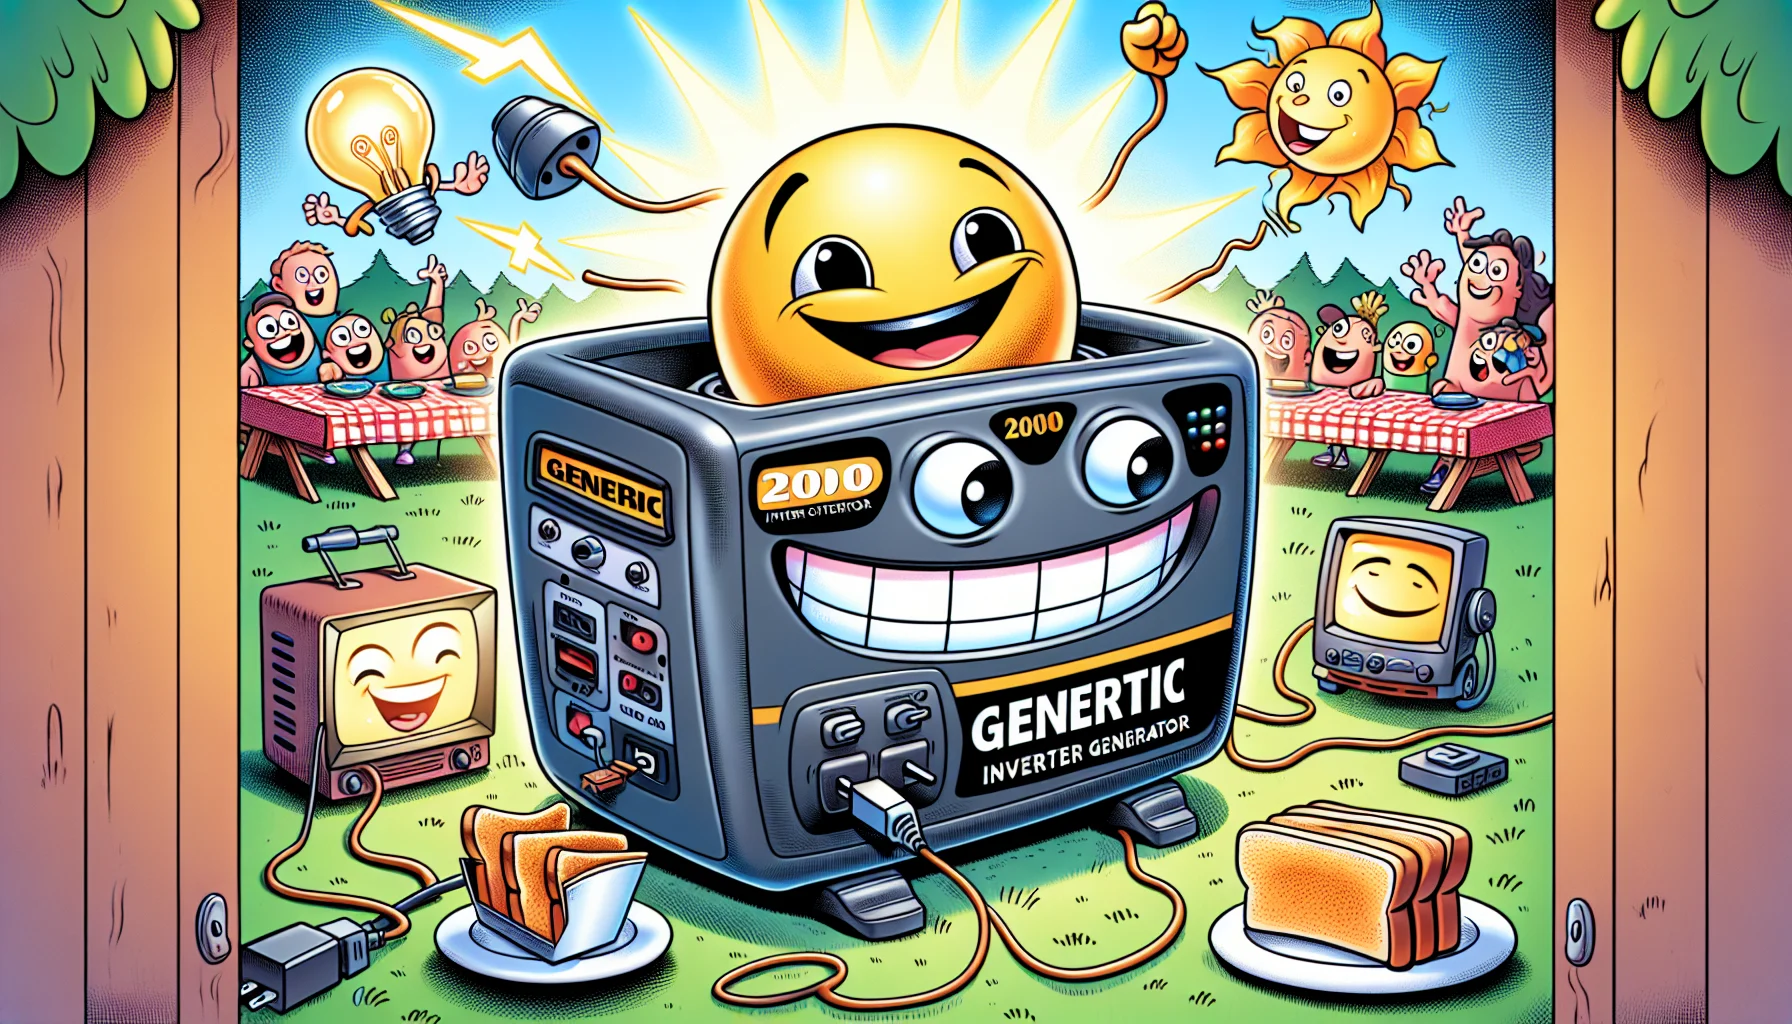 A humorous scene featuring a generic 2000 inverter generator, identical in design to a popular model. It's a sunny day and the generator is personified with cartoon eyes and a wide smile. A line of various appliances, like a toaster with bread popping out, a lamp with a shining bulb, and a small TV displaying a silly cartoon, are happily hopping behind the cheery generator, awaiting their turn to get powered up. The background is a lively picnic scene with people grinning, amazed at the spectacle, pointing with joy and laughter, and preparing to plug their devices in for a power boost.